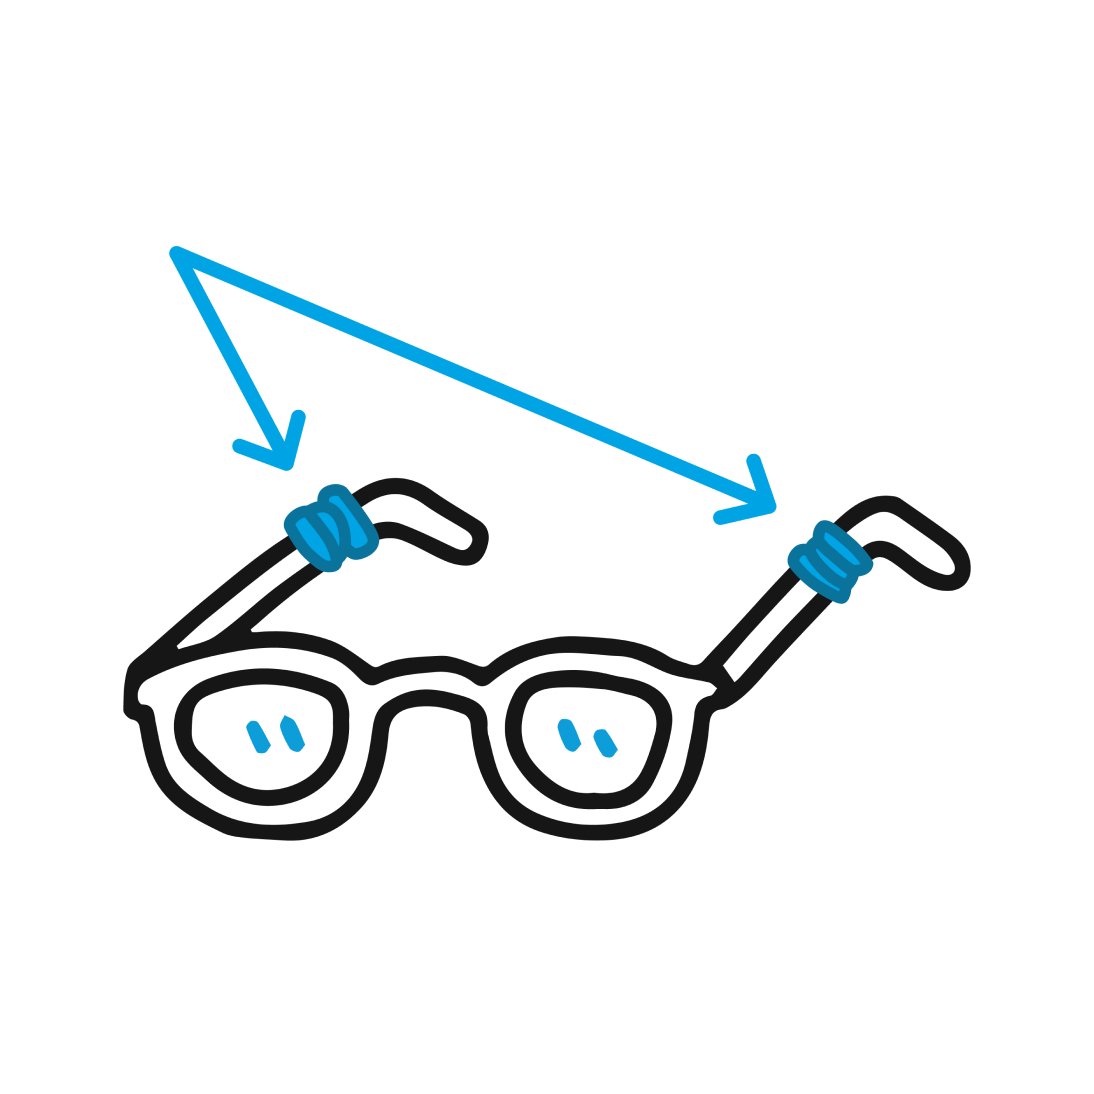 https://www.warbyparker.com/learn/wp-content/uploads/2022/12/how-to-keep-glasses-from-slipping-hairties.jpg